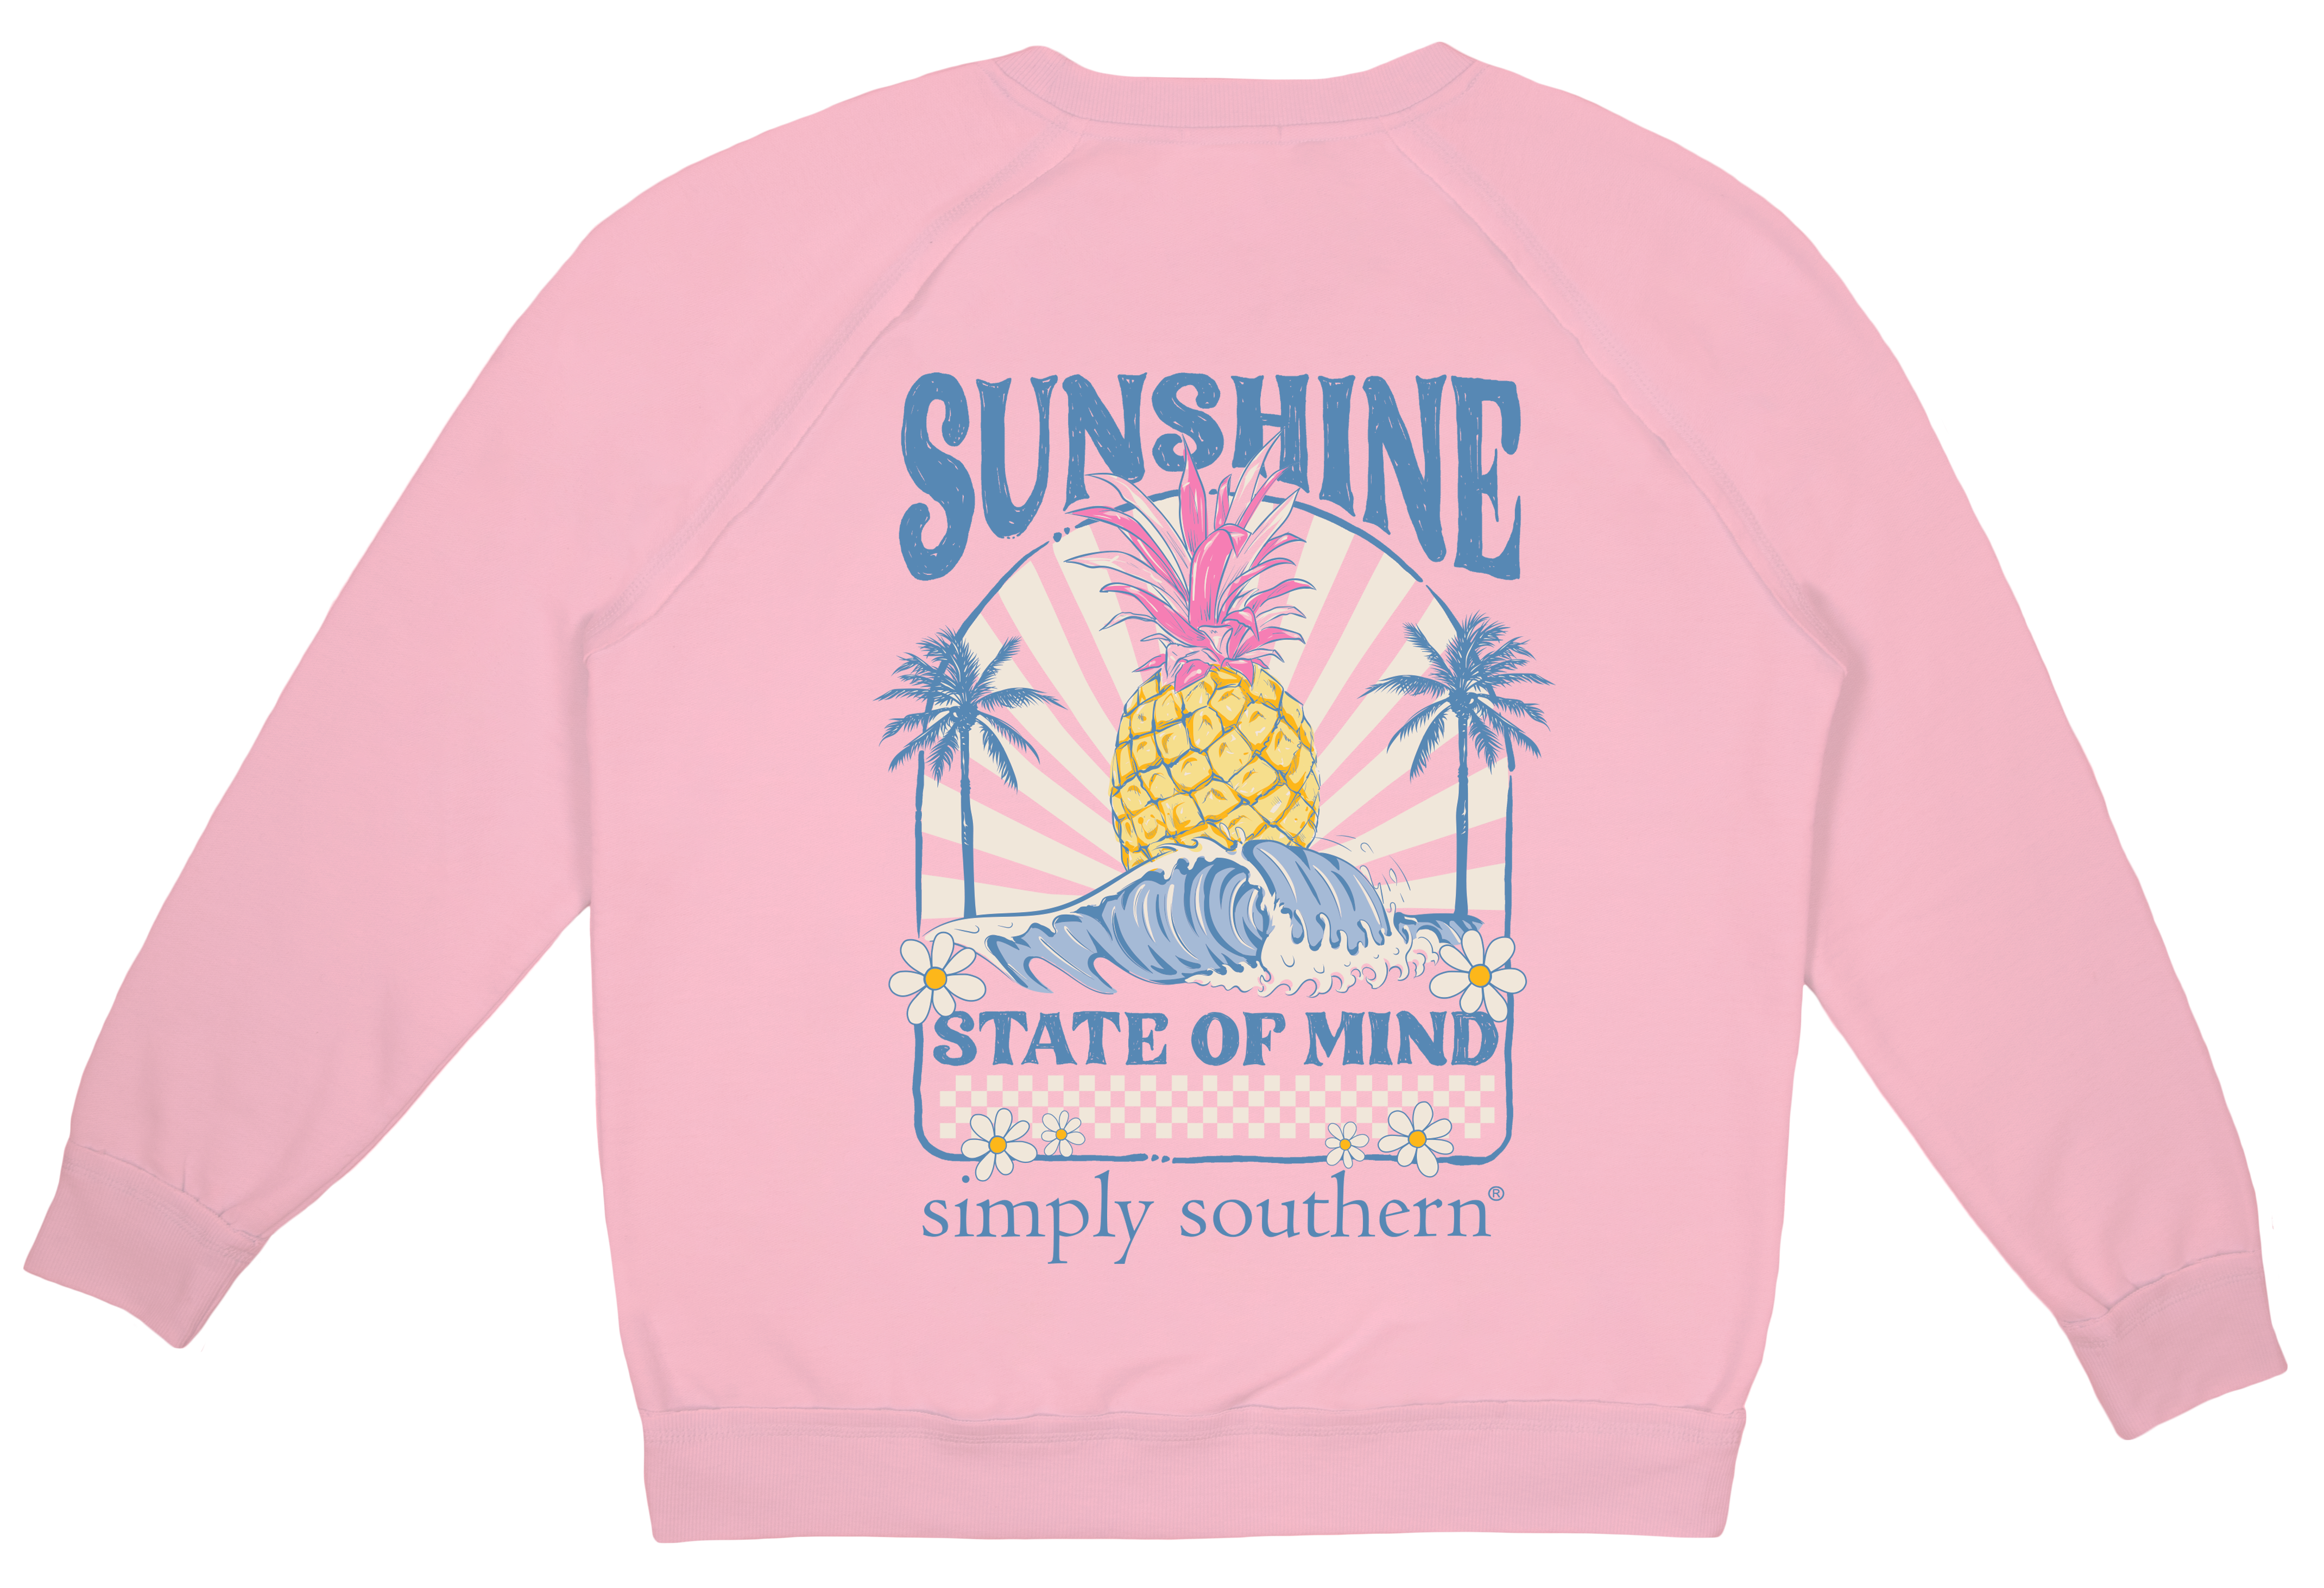 Simply Southern - North Carolina State of Mind